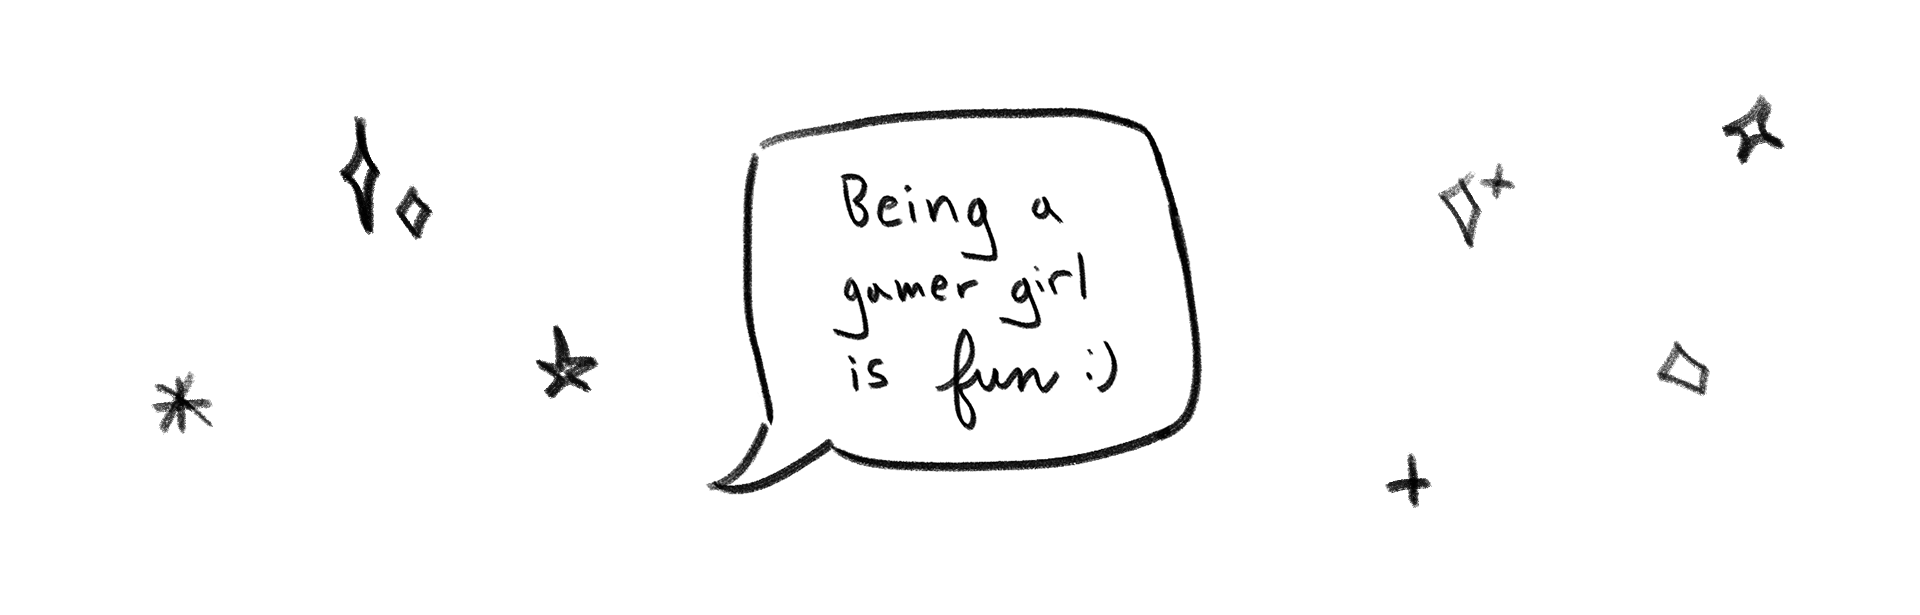 Being a gamer girl is fun :)